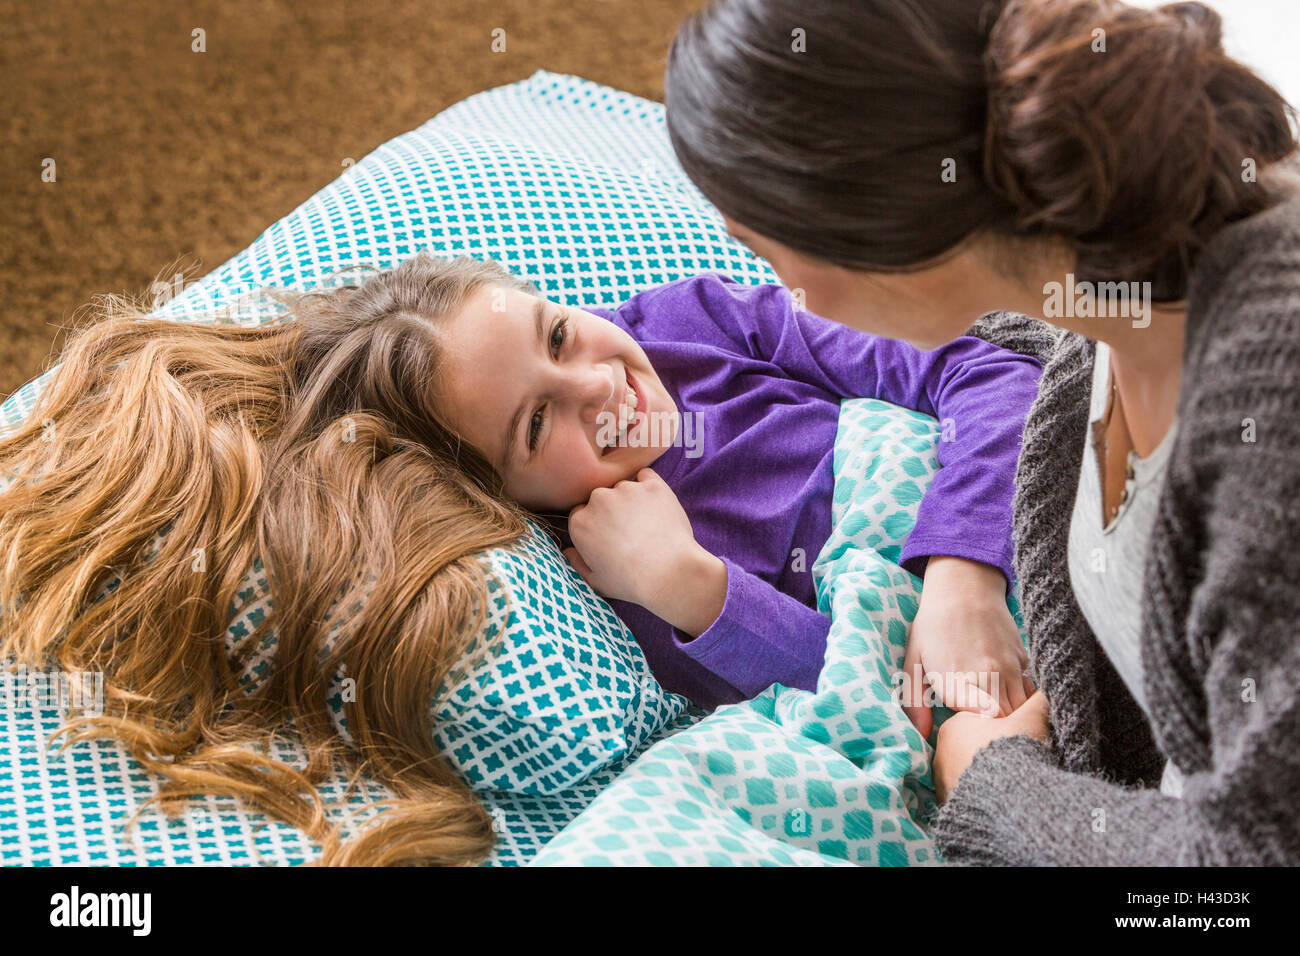 Mother comforting daughter at bedtime Stock Photo